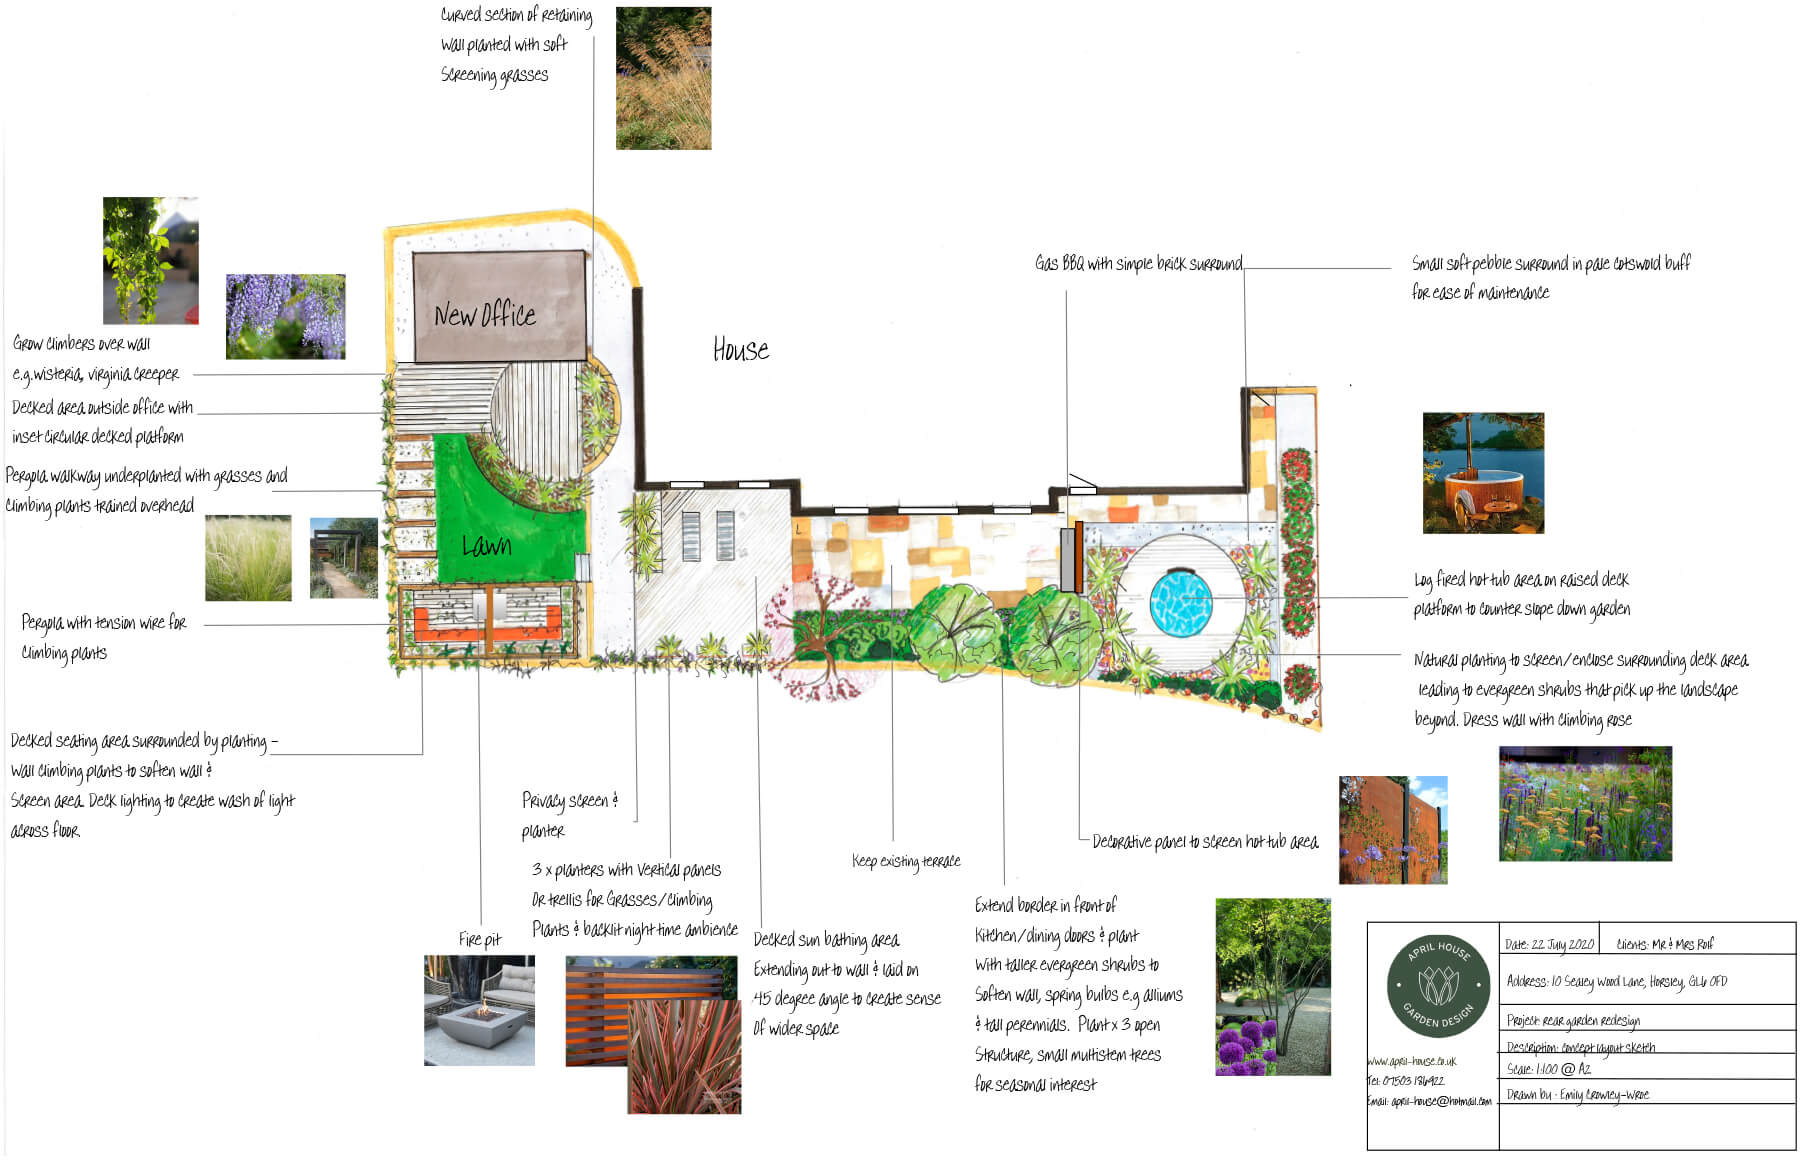 An example of a design concept drawing for a new-build garden